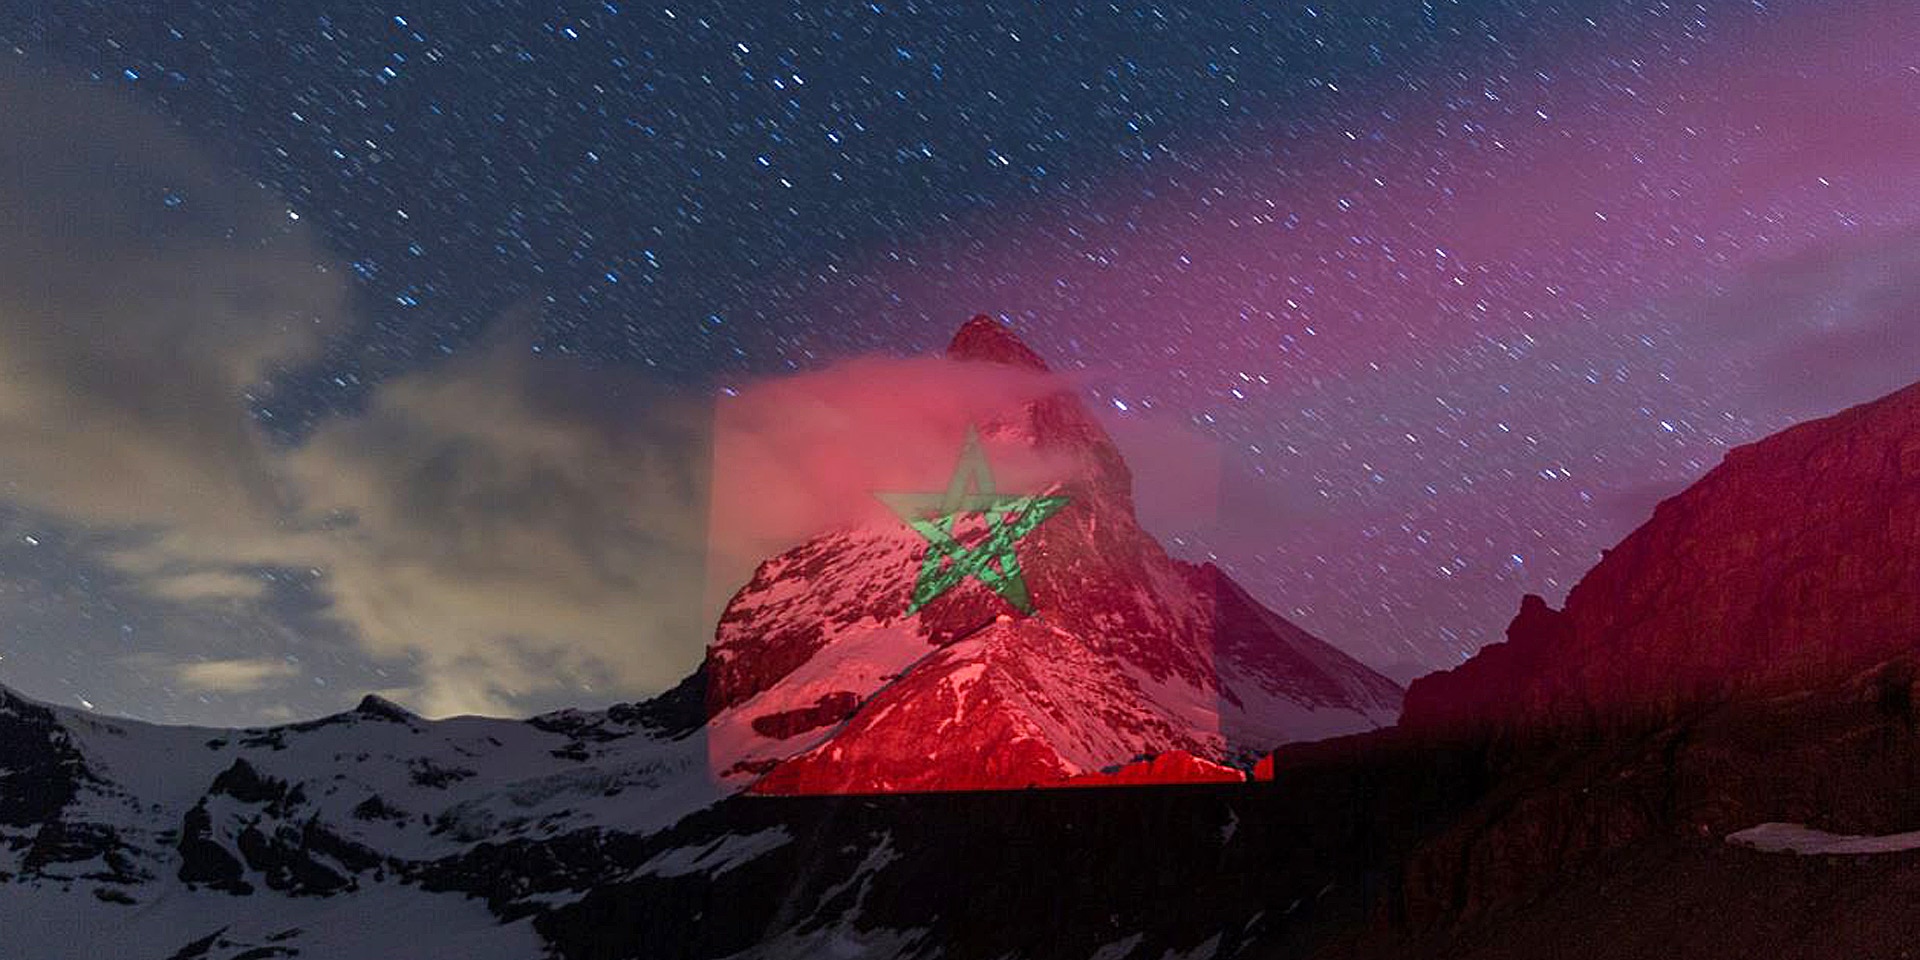 Morocco's red and green flag being projected onto the iconic Swiss mountain.